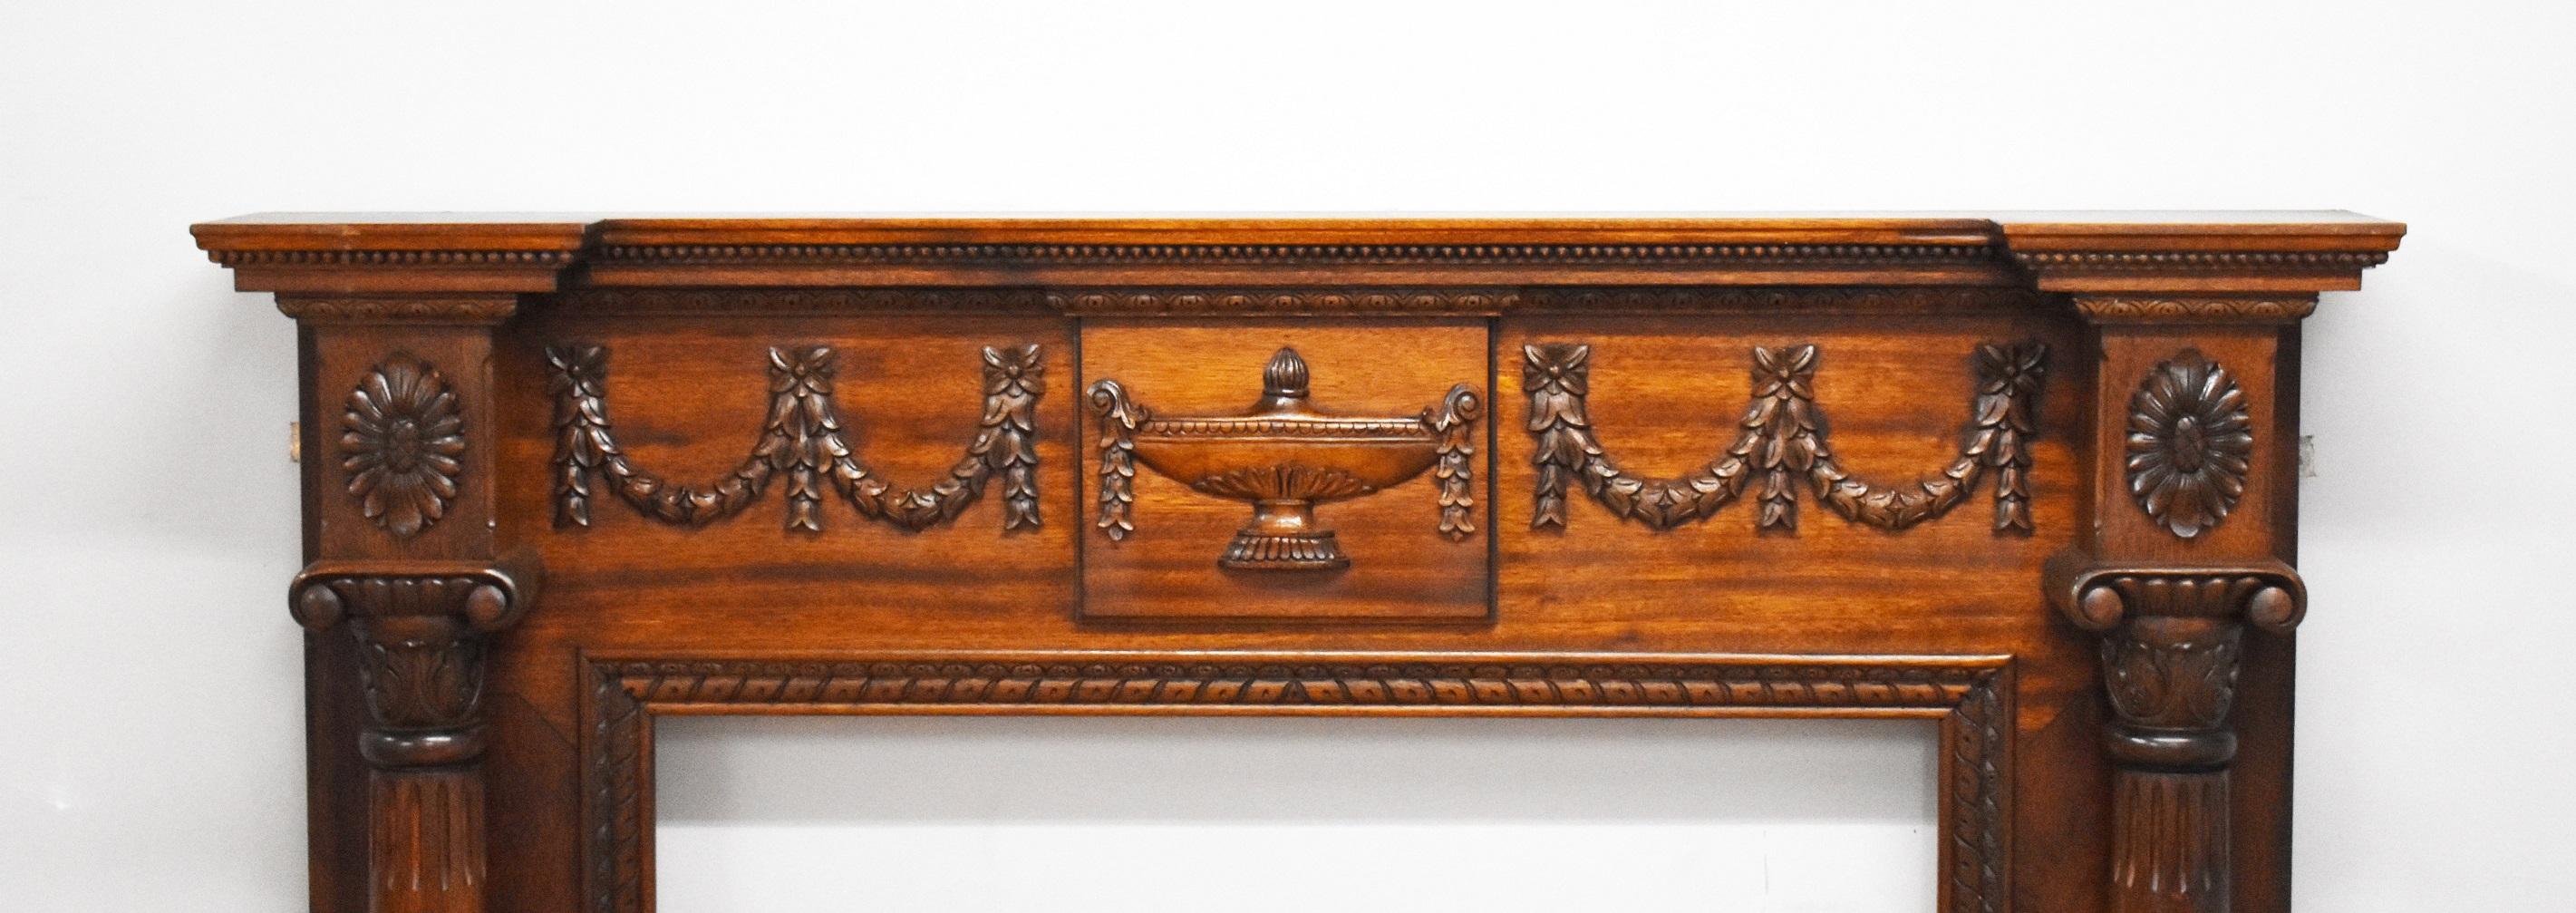 Mahogany fire surround in good condition. To the top are carved swags and tails either side a carved urn to the centre and carved columns to each side.

Inside measurements Width 94cm Height 85cm.